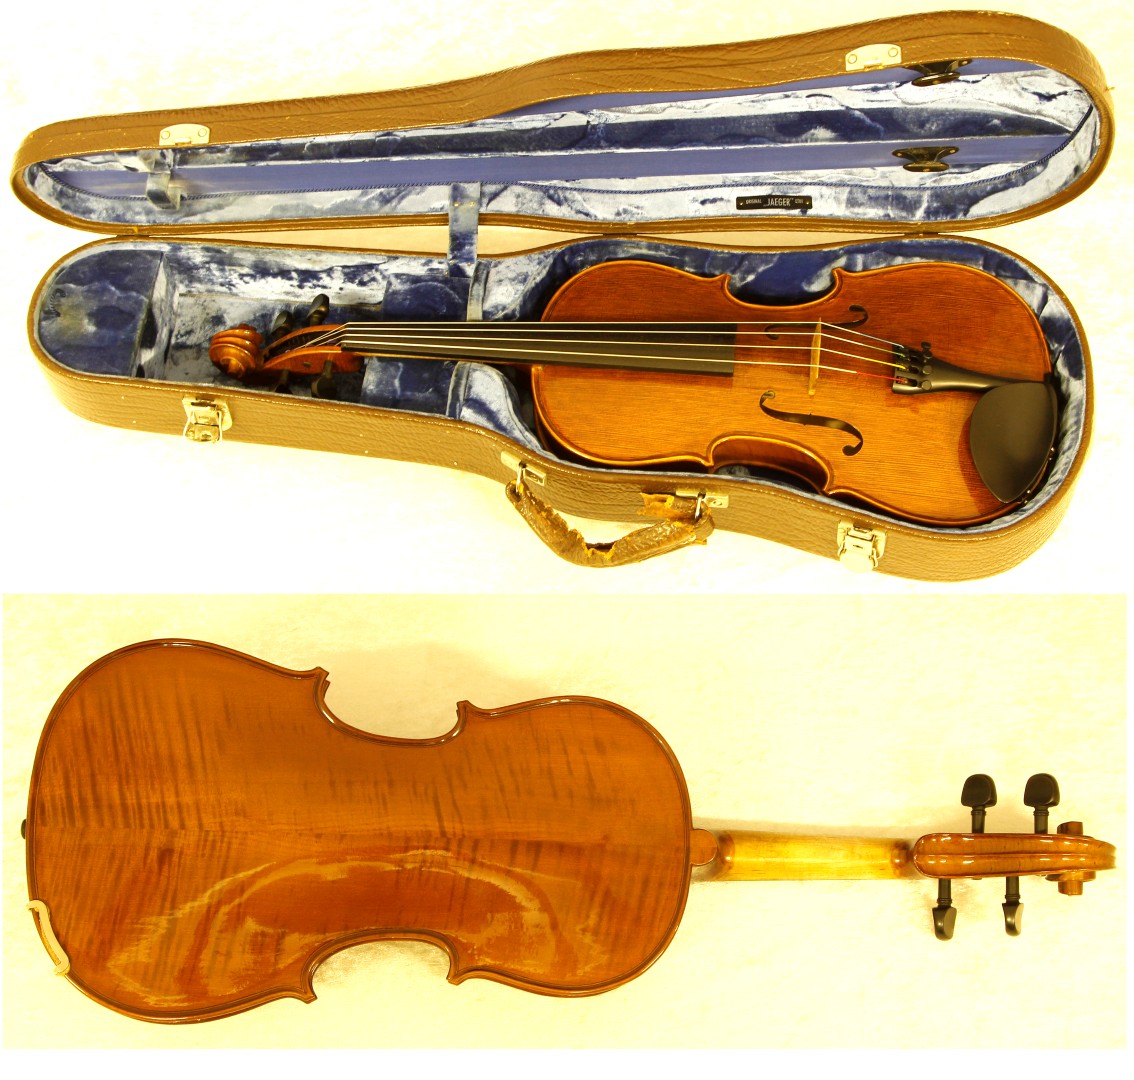 A Stentor viola with two piece back, length of back 39.4cm, cased